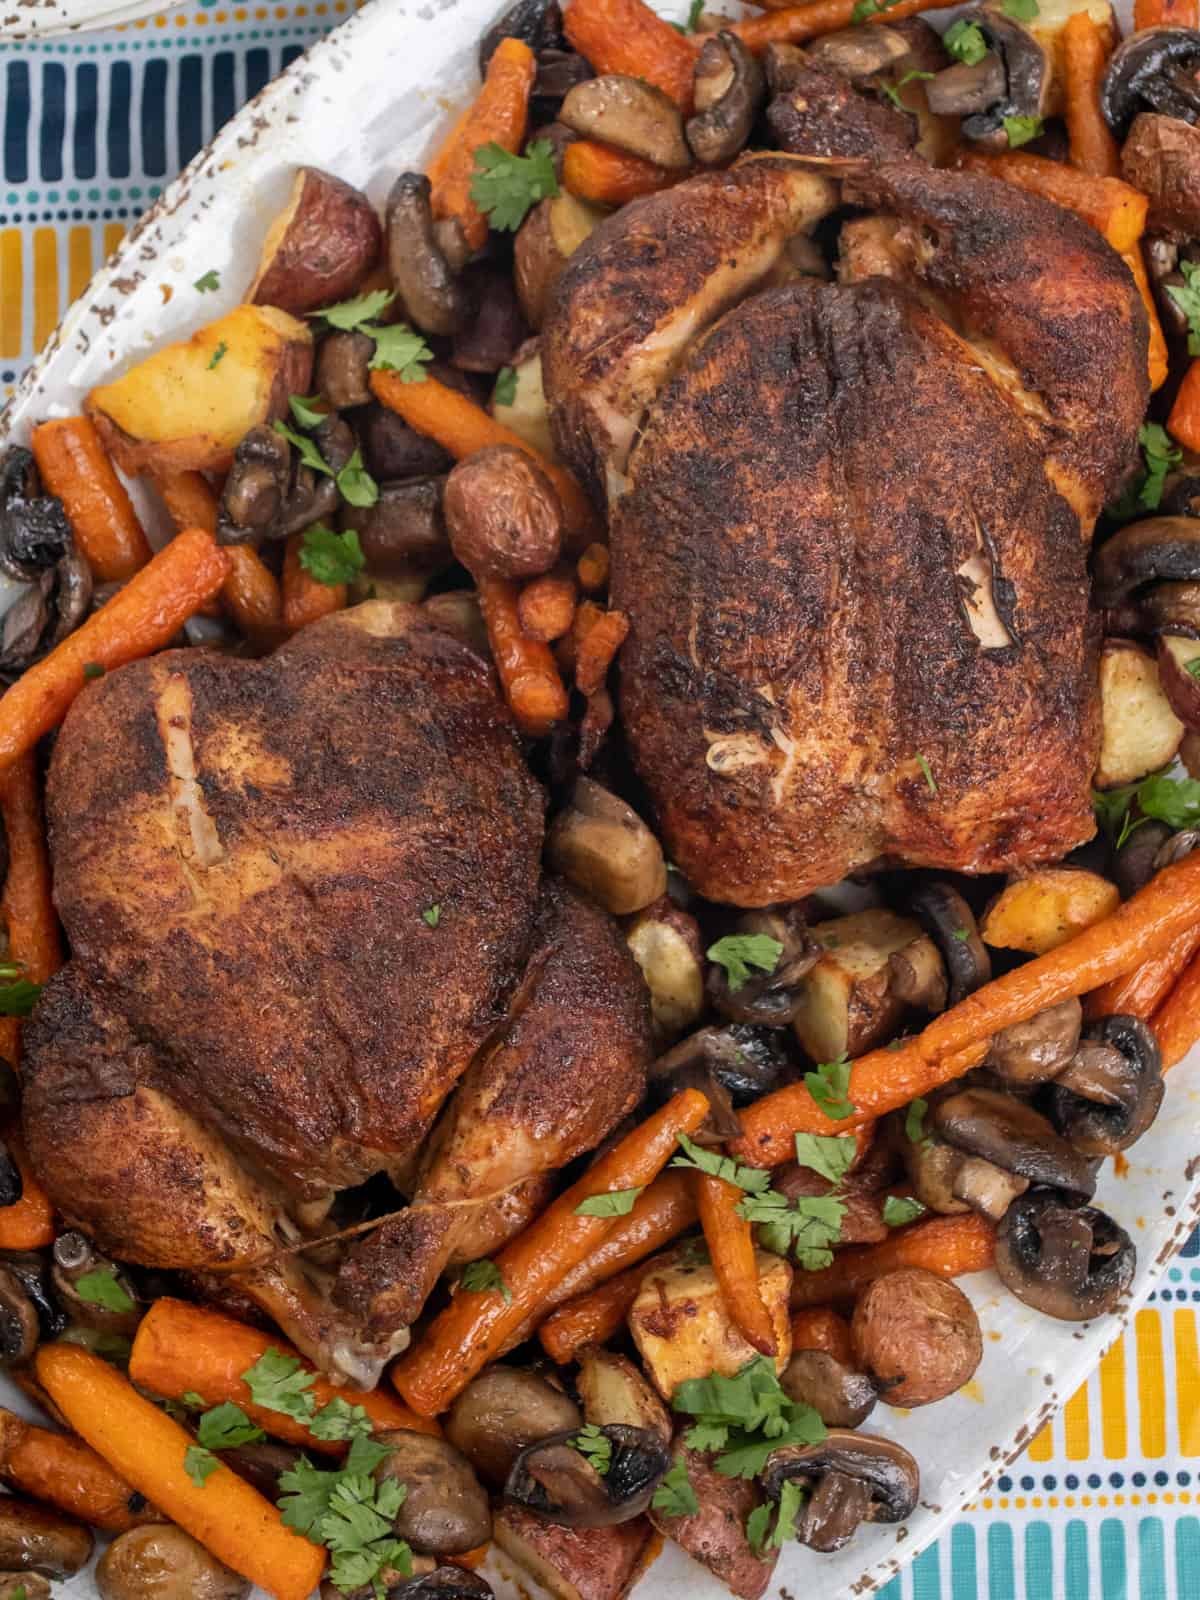 Cooked whole chicken on a platter with vegetables.